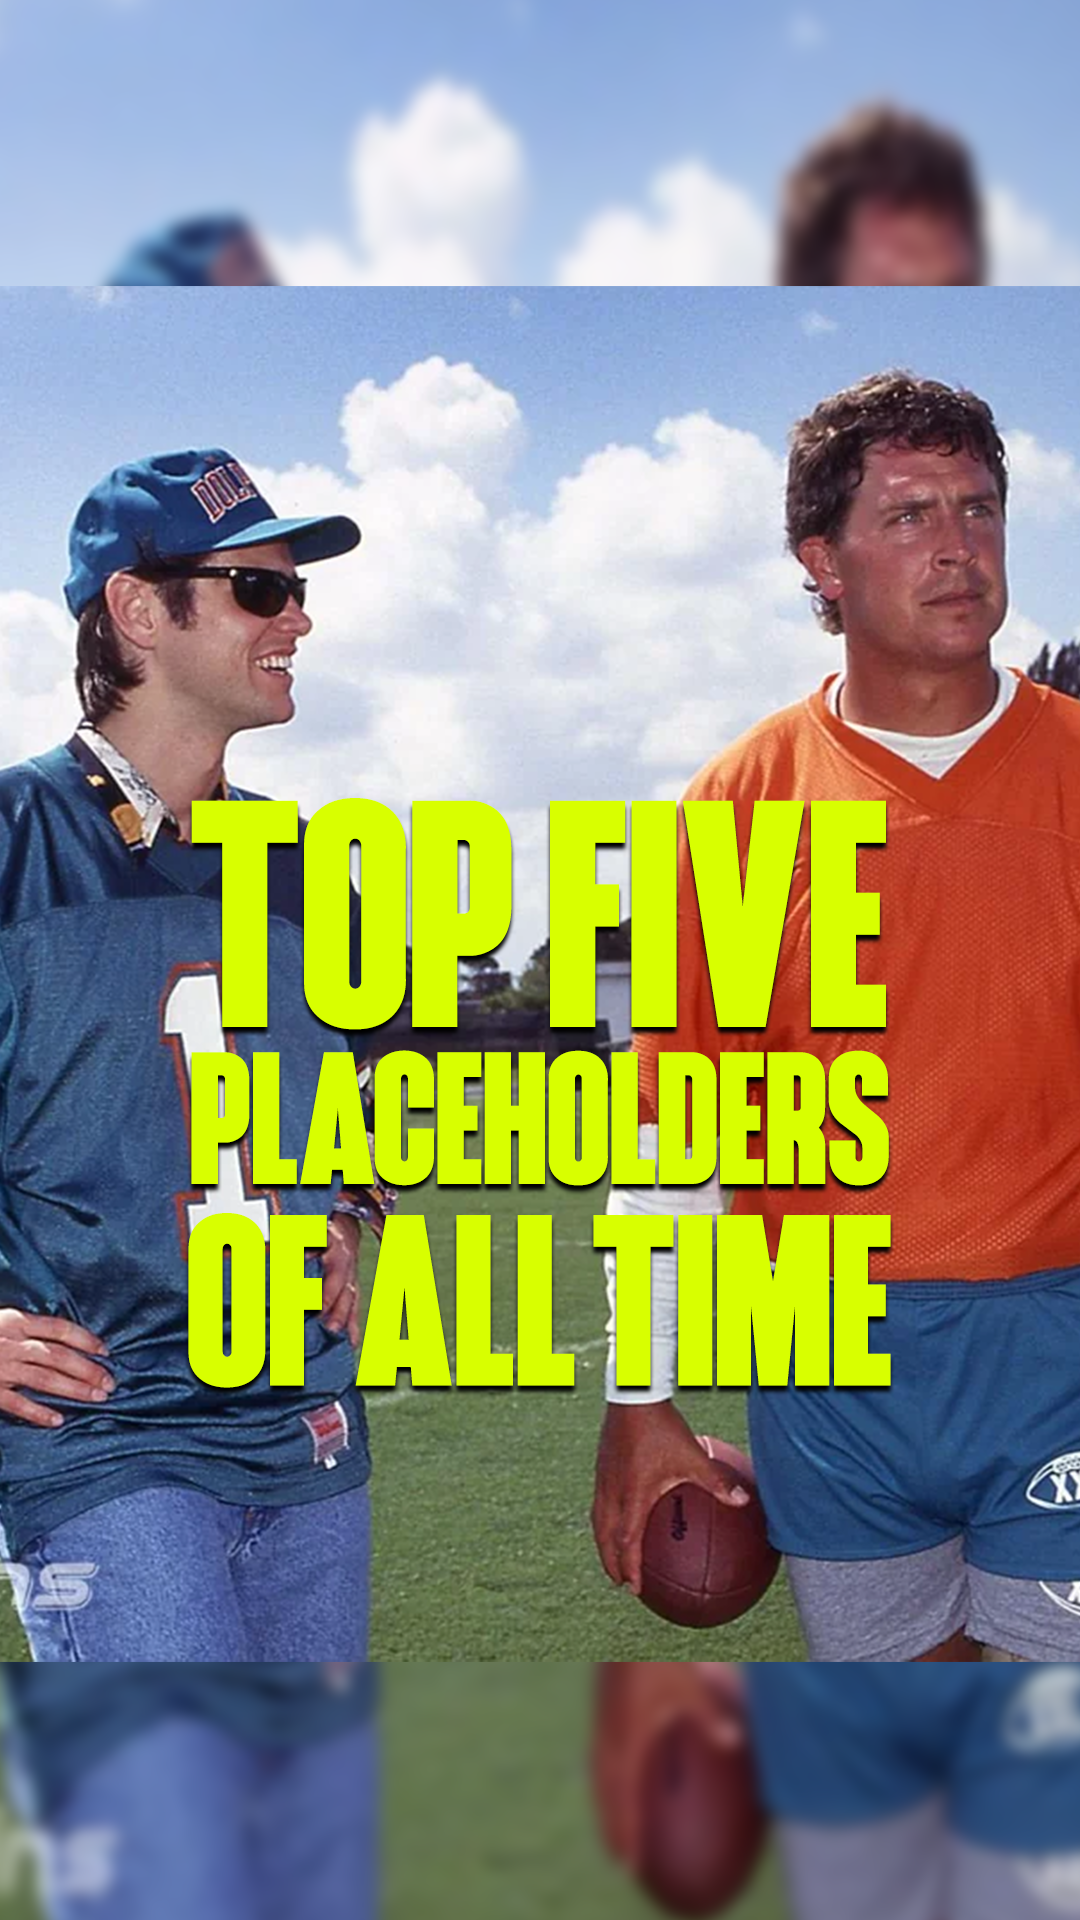 Top 5 Placeholders of all Time